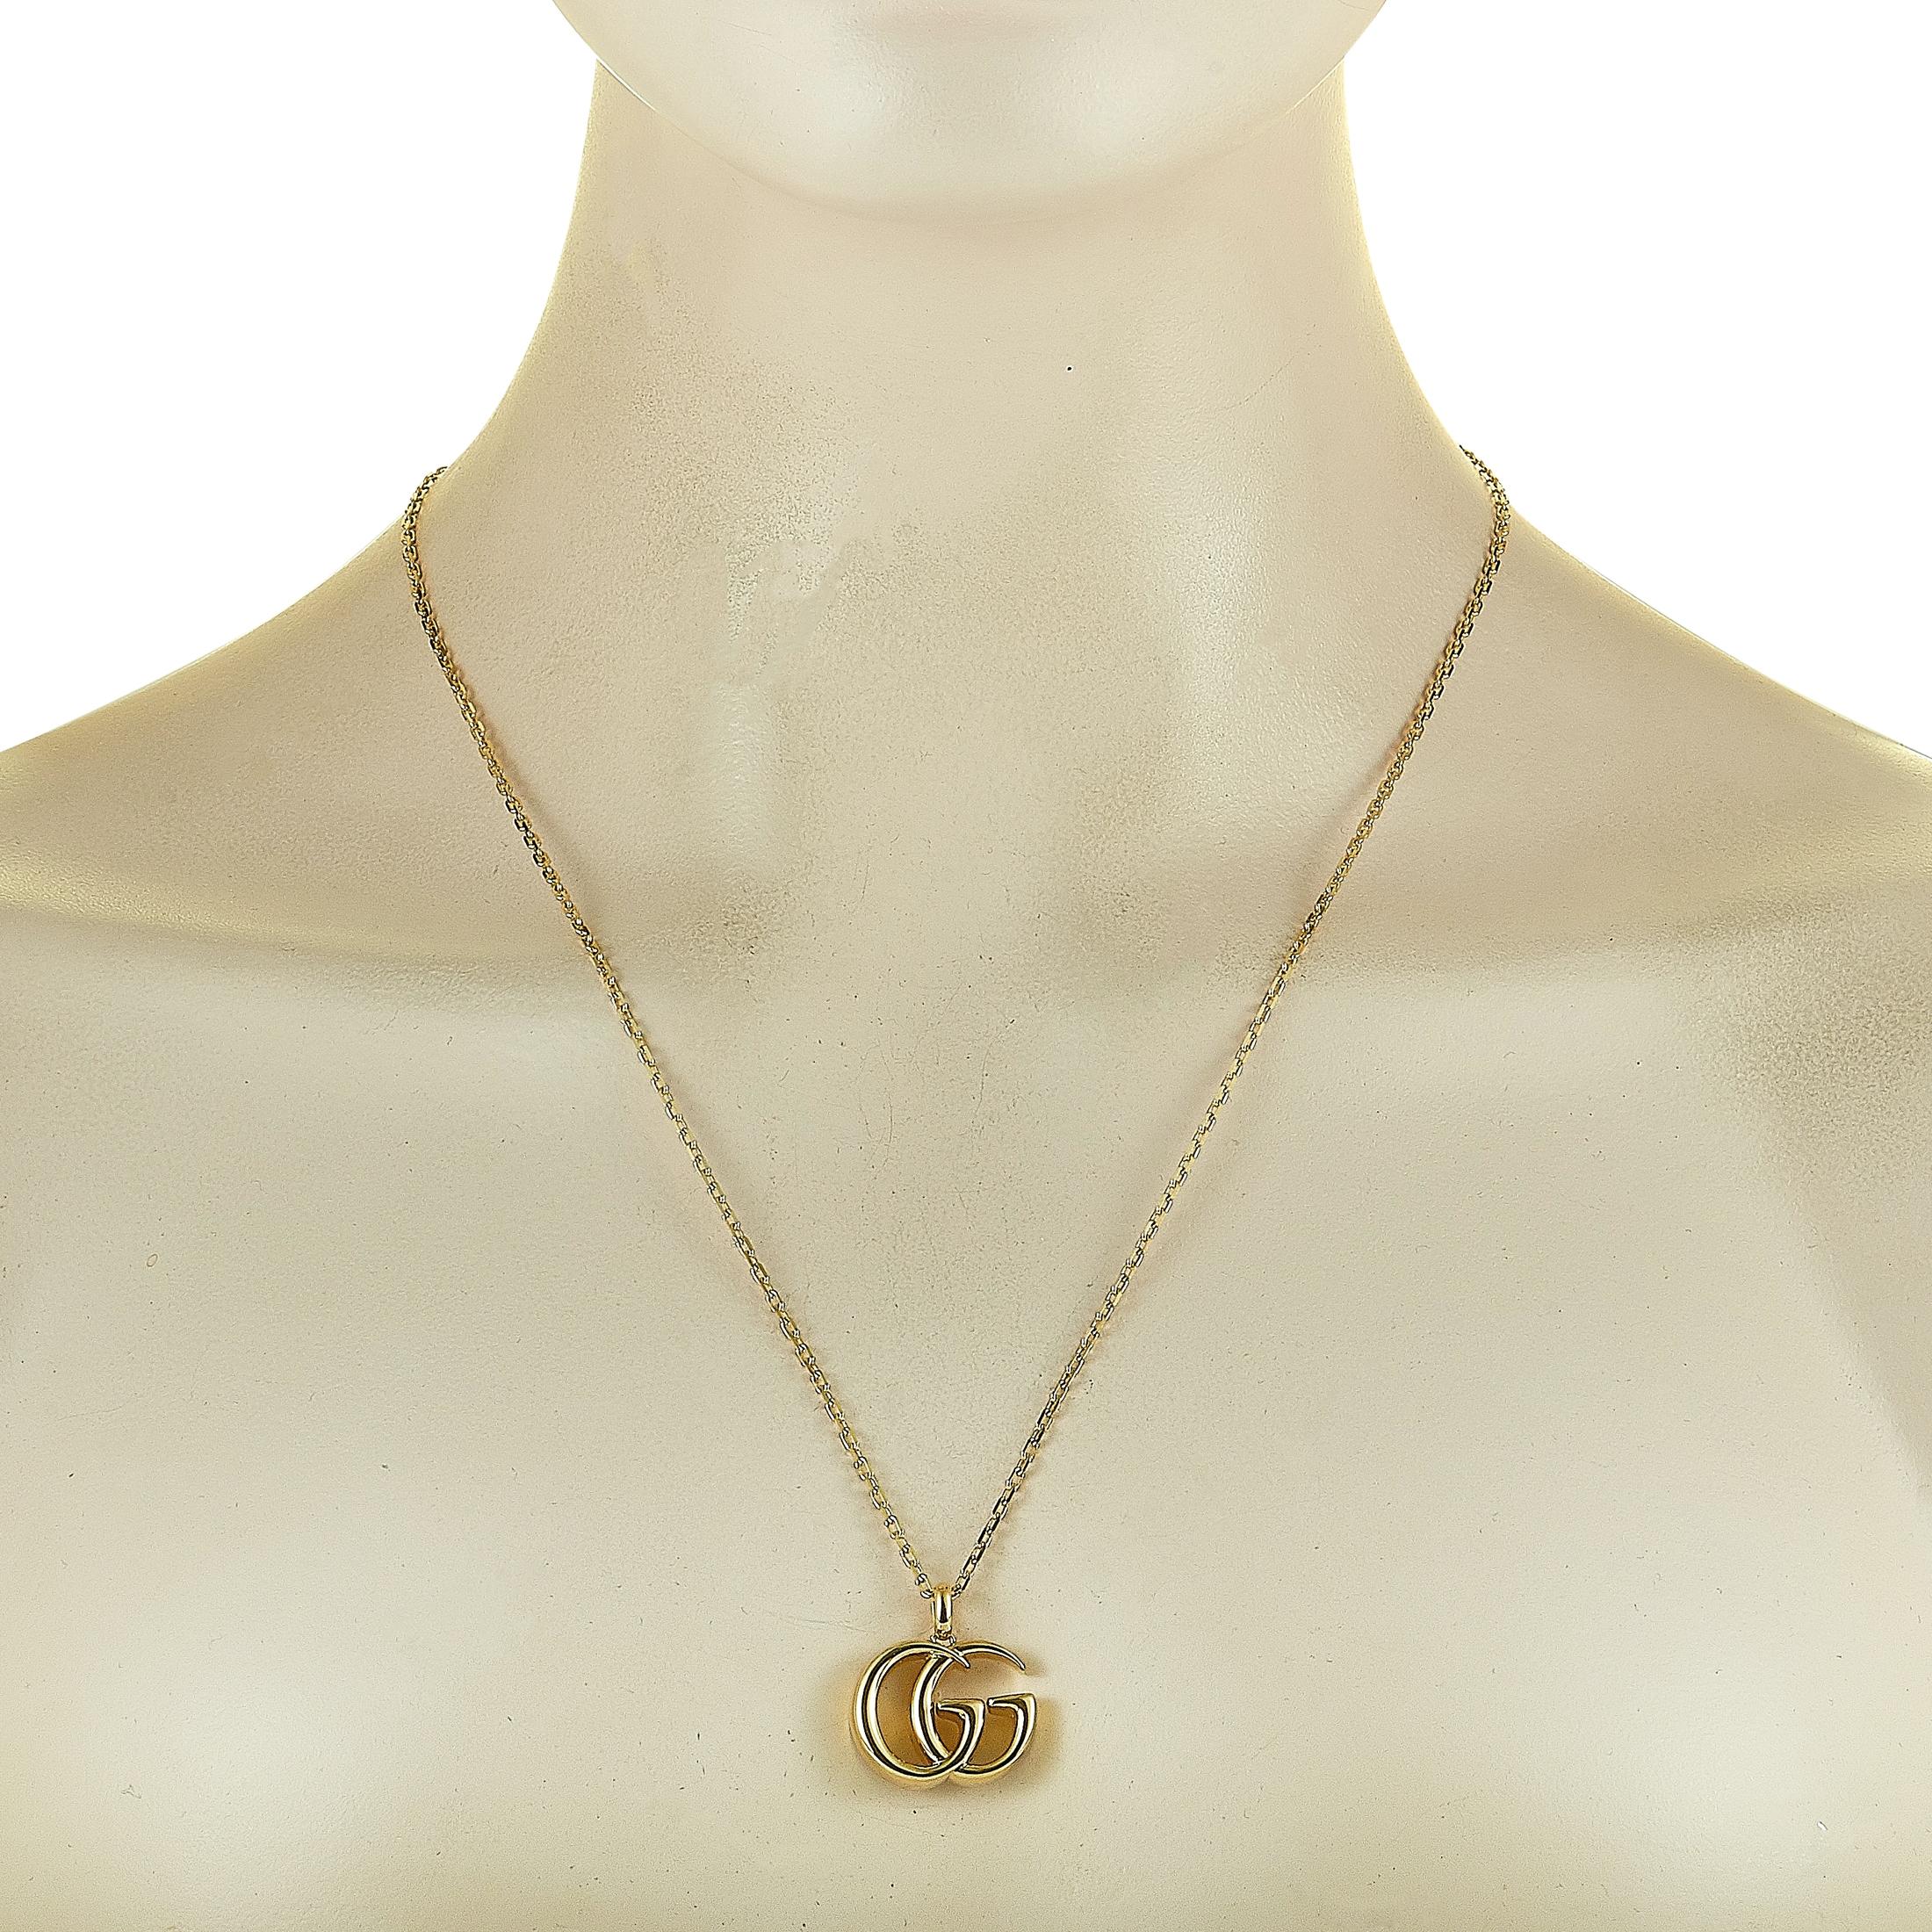 The Gucci “GG Running” necklace is made of 18K yellow gold and weighs 16.7 grams. The necklace boasts a 22” chain and a pendant that measures 1” in length and 0.87” in width.
 
 This jewelry piece is offered in brand new condition and includes the